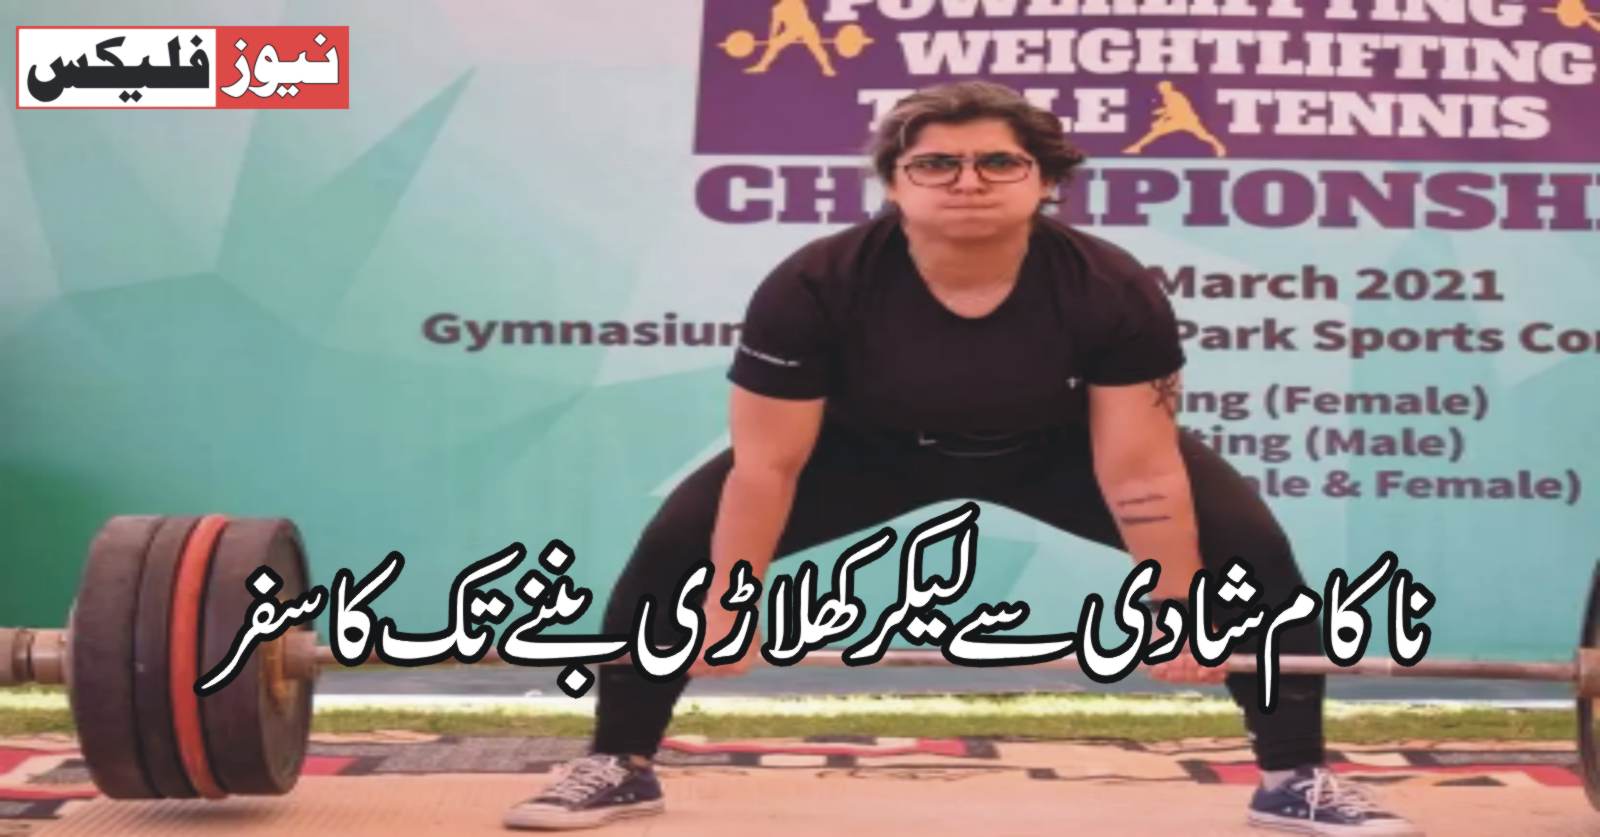 Meet Rameesha – Her Journey From A ‘Failed Marriage’ To Becoming An ‘Athlete’ Will Inspire You!